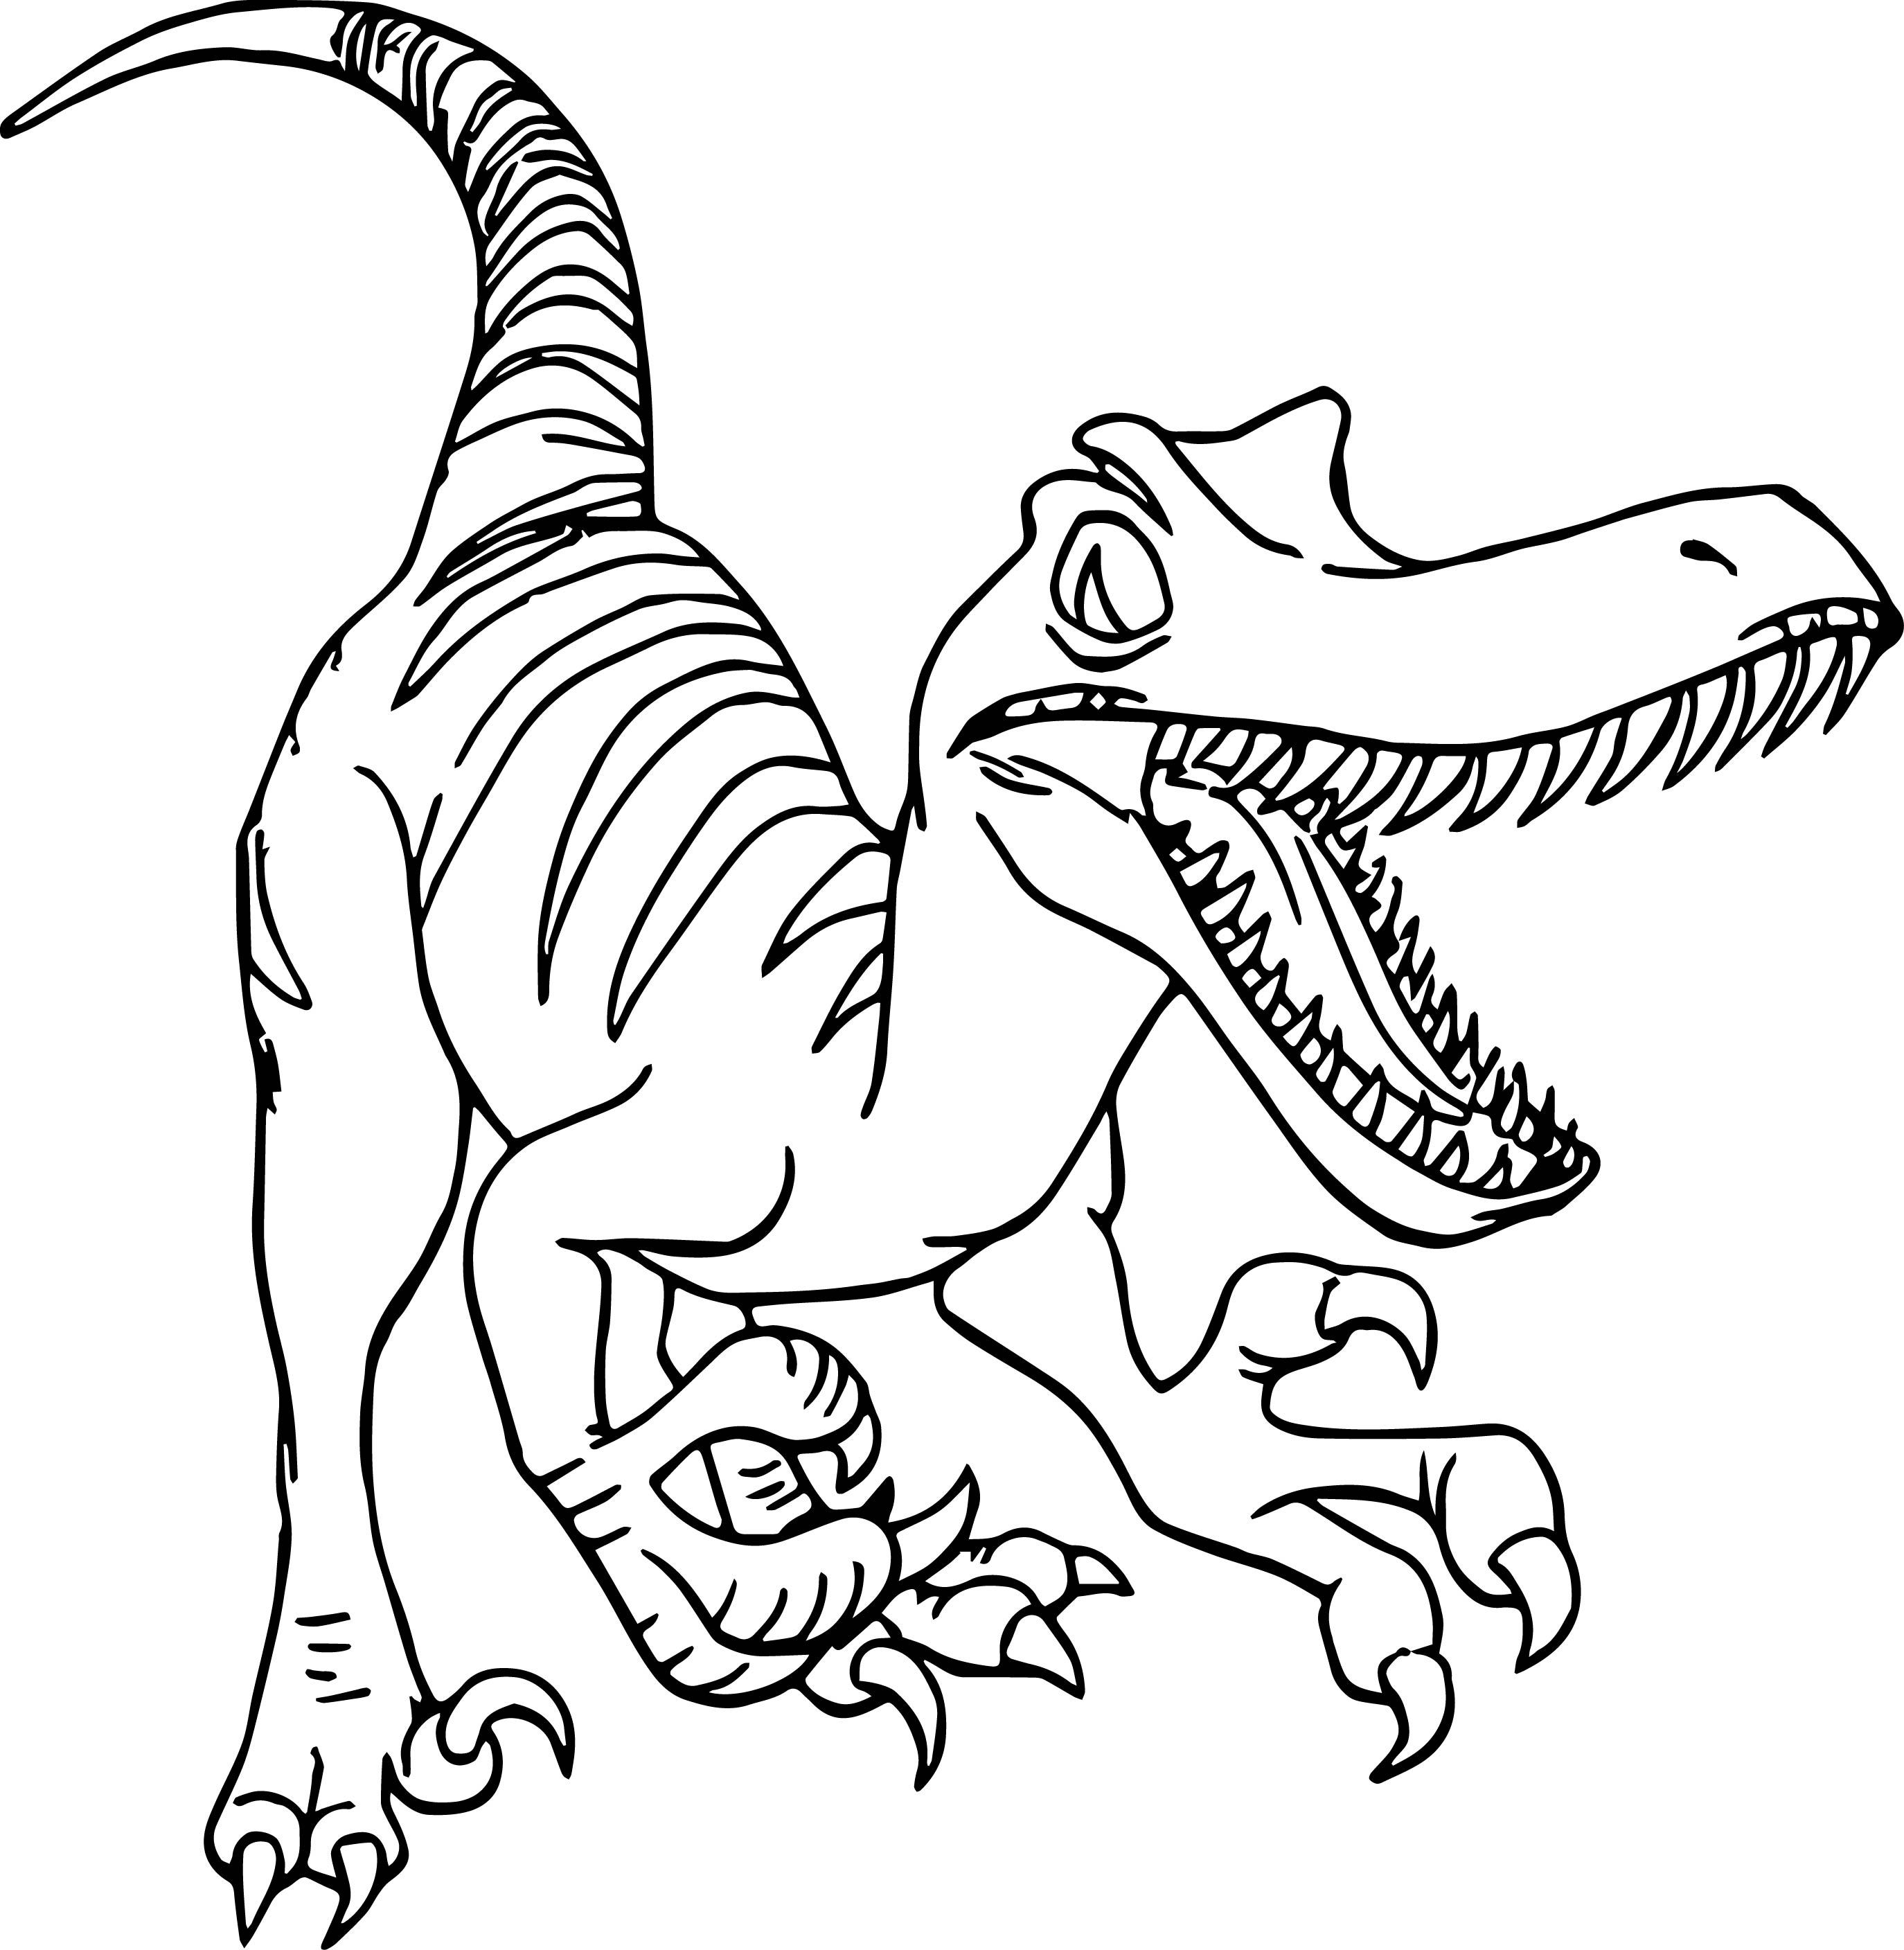 Velociraptor Printable Coloring Pages at GetColorings.com | Free